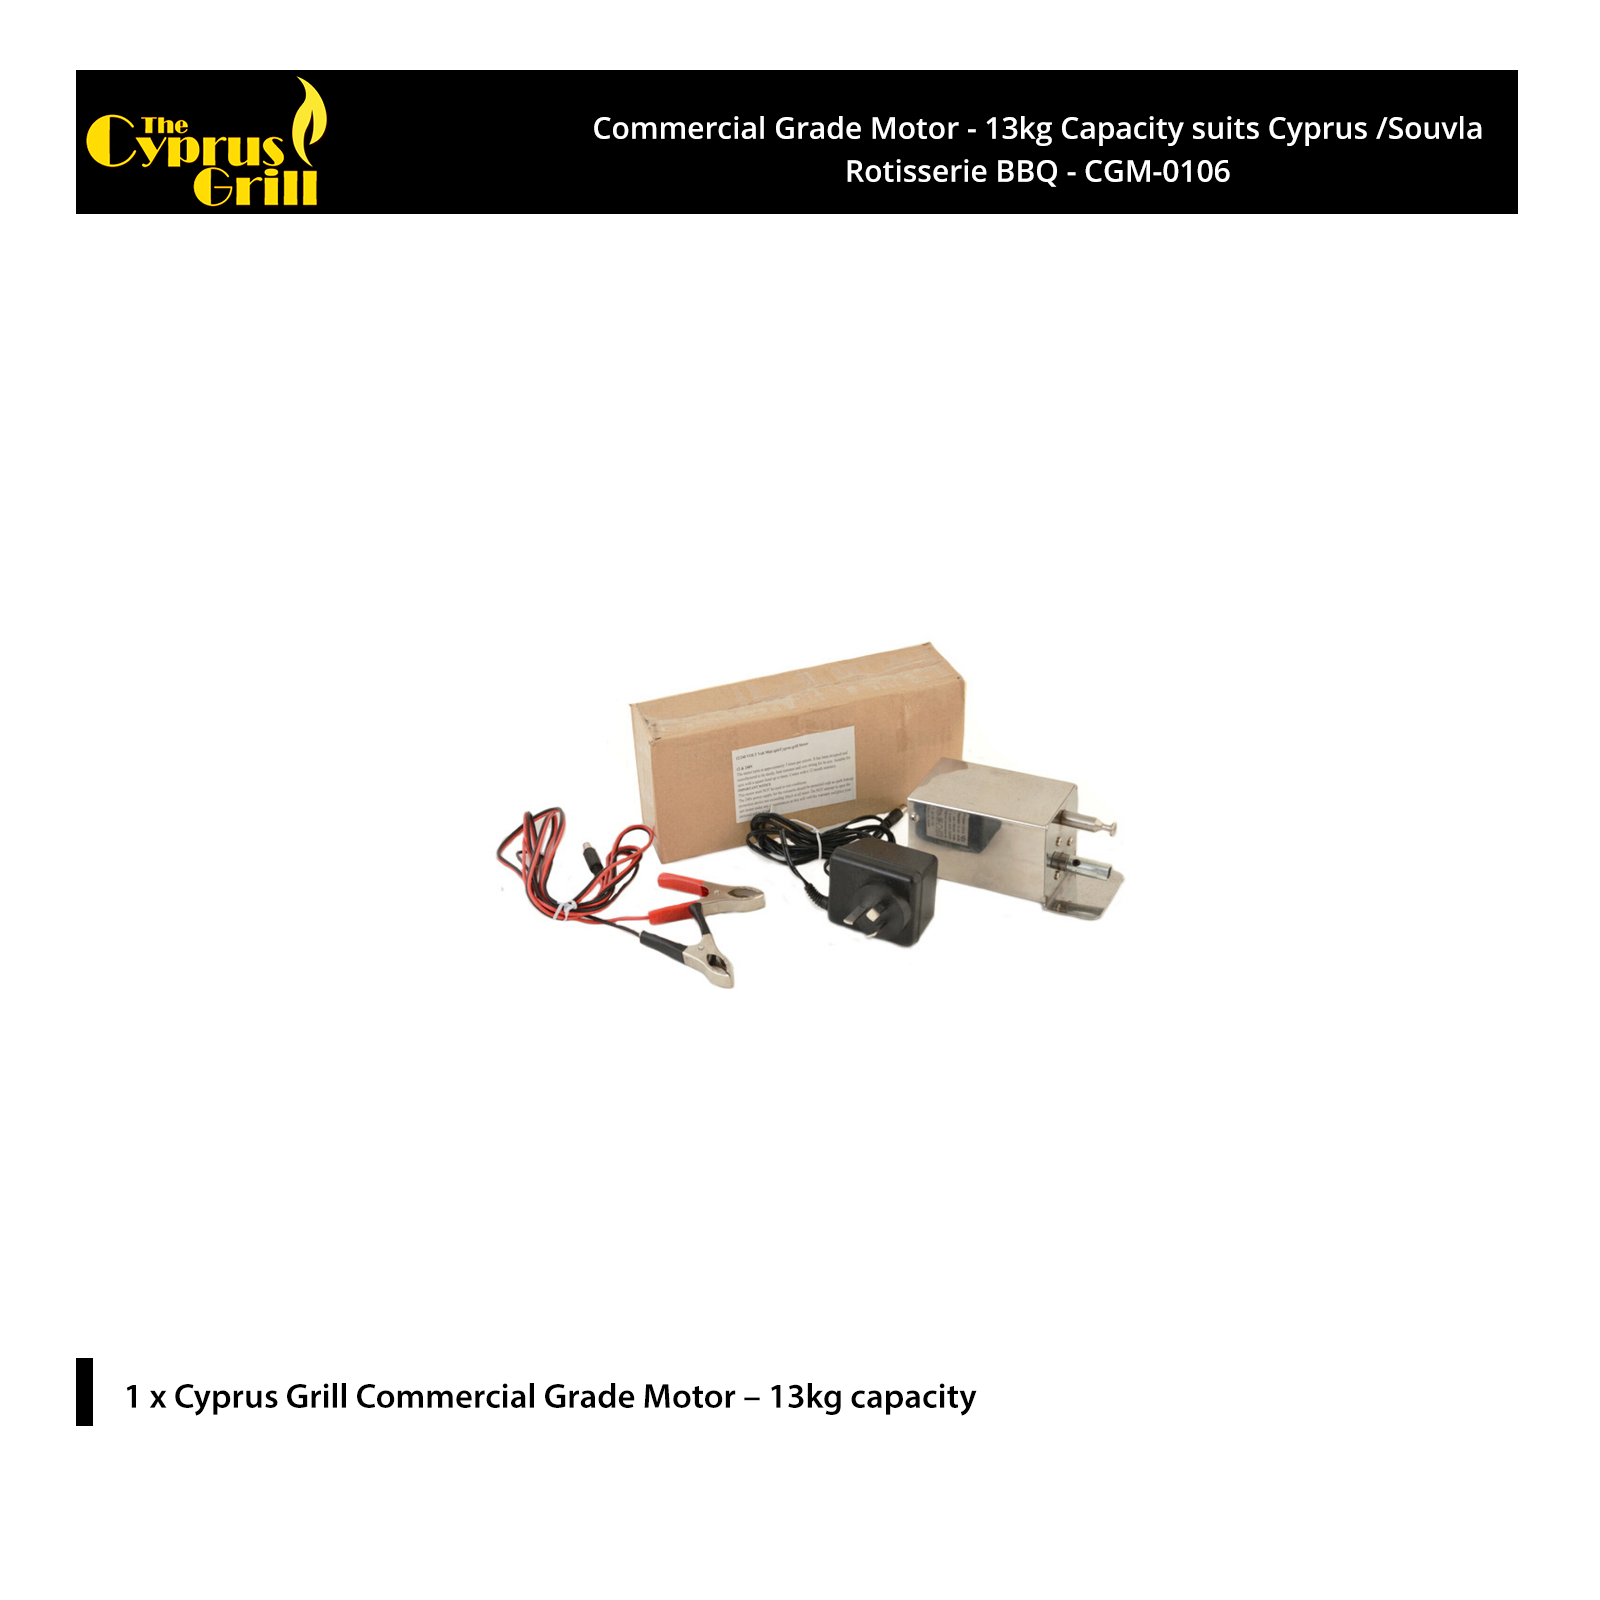 Cyprus Grill Commercial Grade Motor - 13kg Capacity suits Cyprus /Souvla Rotisserie BBQ - CGM-0106